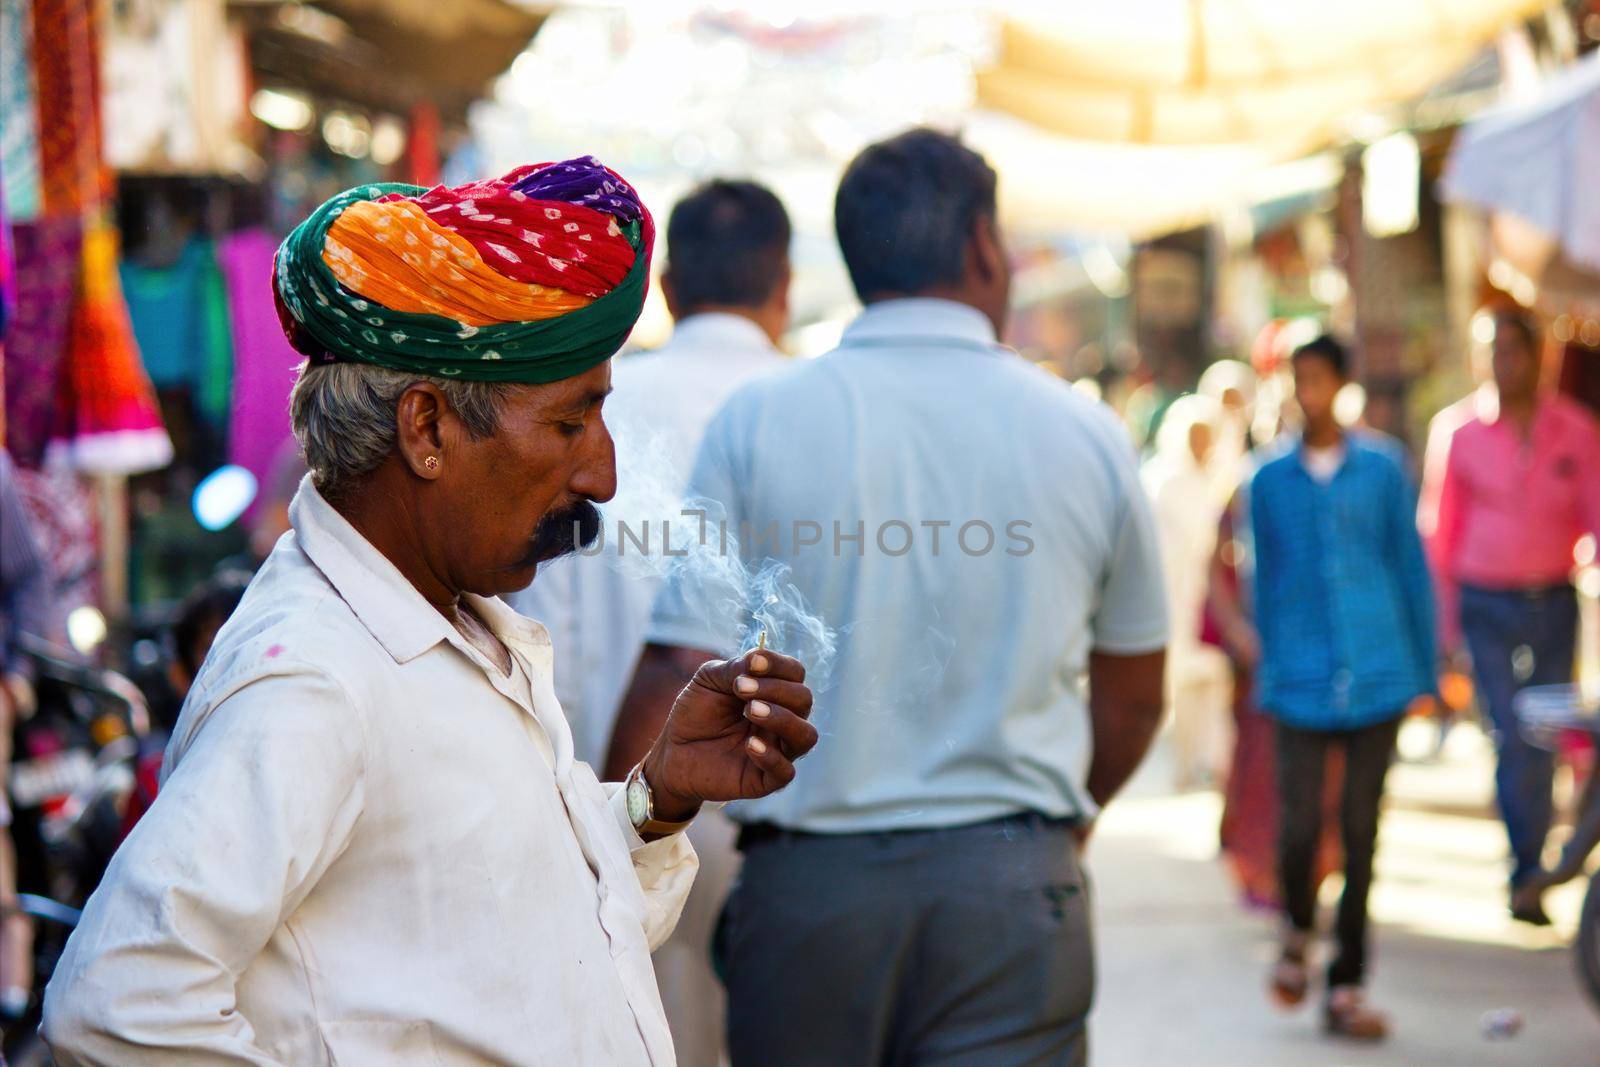 Pushkar, India - NOVEMBER 10, 2016: An old Rajasthani man in traditional ethnic wear such as colorful turban and typical white shirt smoking cigarette or mini-cigar filled with tobacco by arpanbhatia